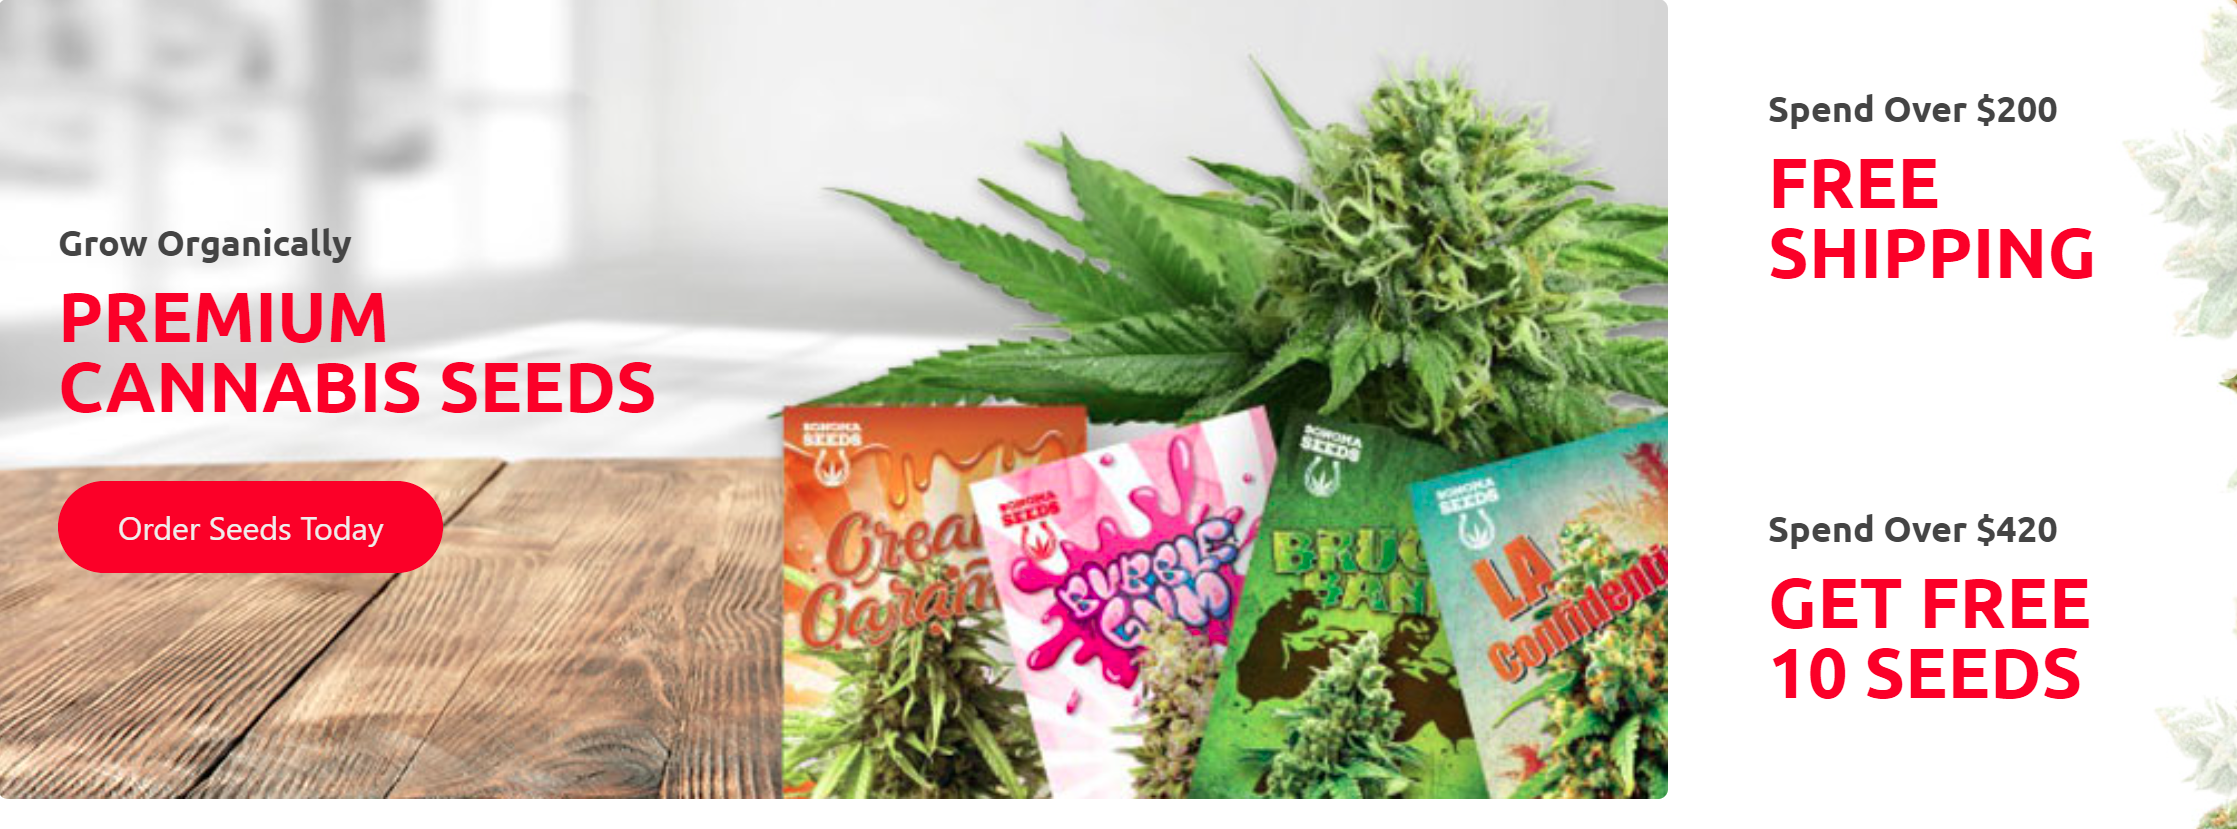 Win Free Cannabis Seeds When You Buy From Online Sellers